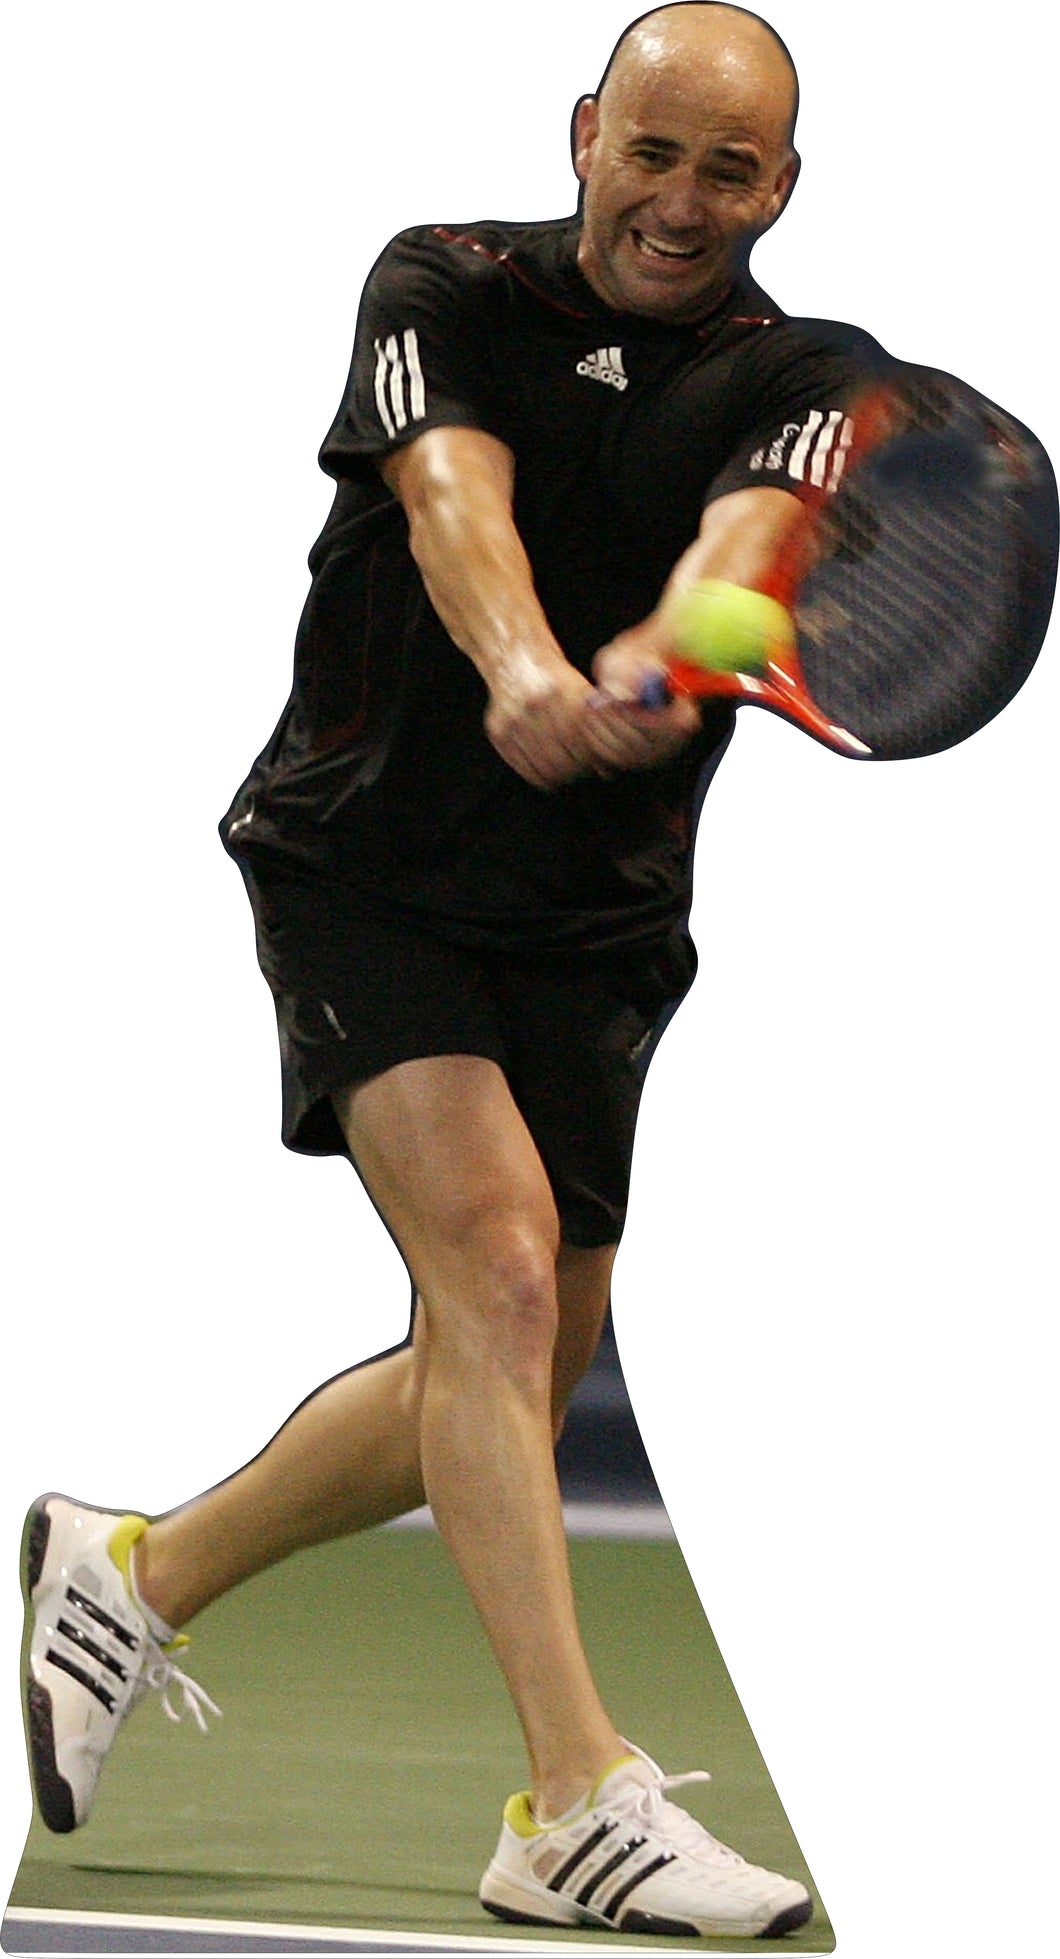 ANDRE AGASSI - PROFESSIONAL TENNIS PLAYER-70